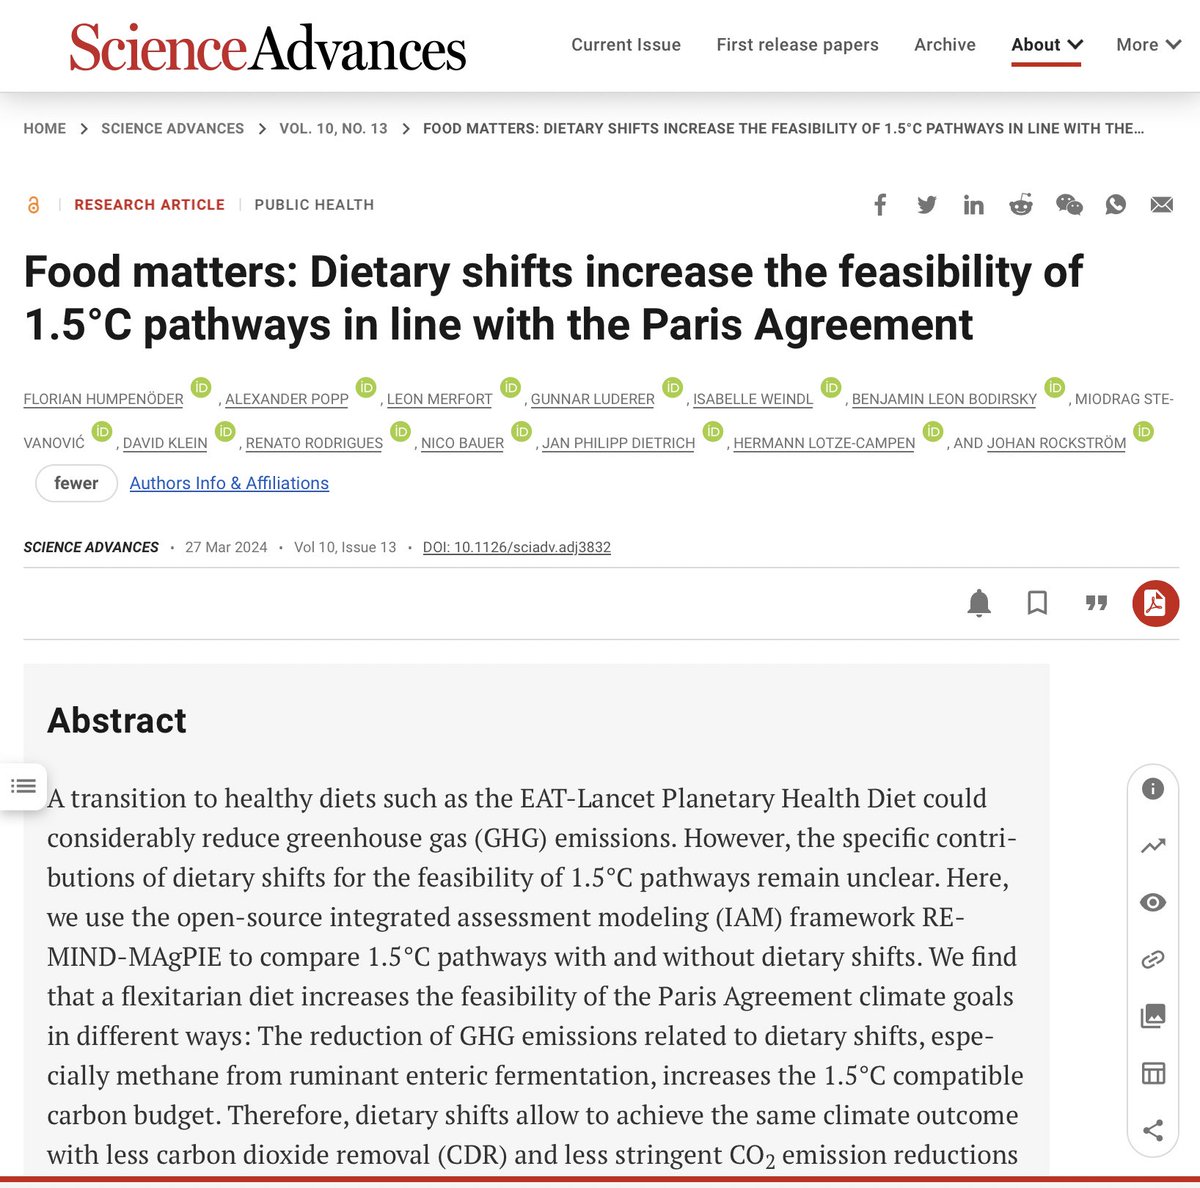 OUT NOW! Our new study on the many benefitial effect of changing dietary choices towards less meat, less processed food and higher share of unsaturated fats. Result: Big synergies between private health and global climate benefits. science.org/doi/10.1126/sc…